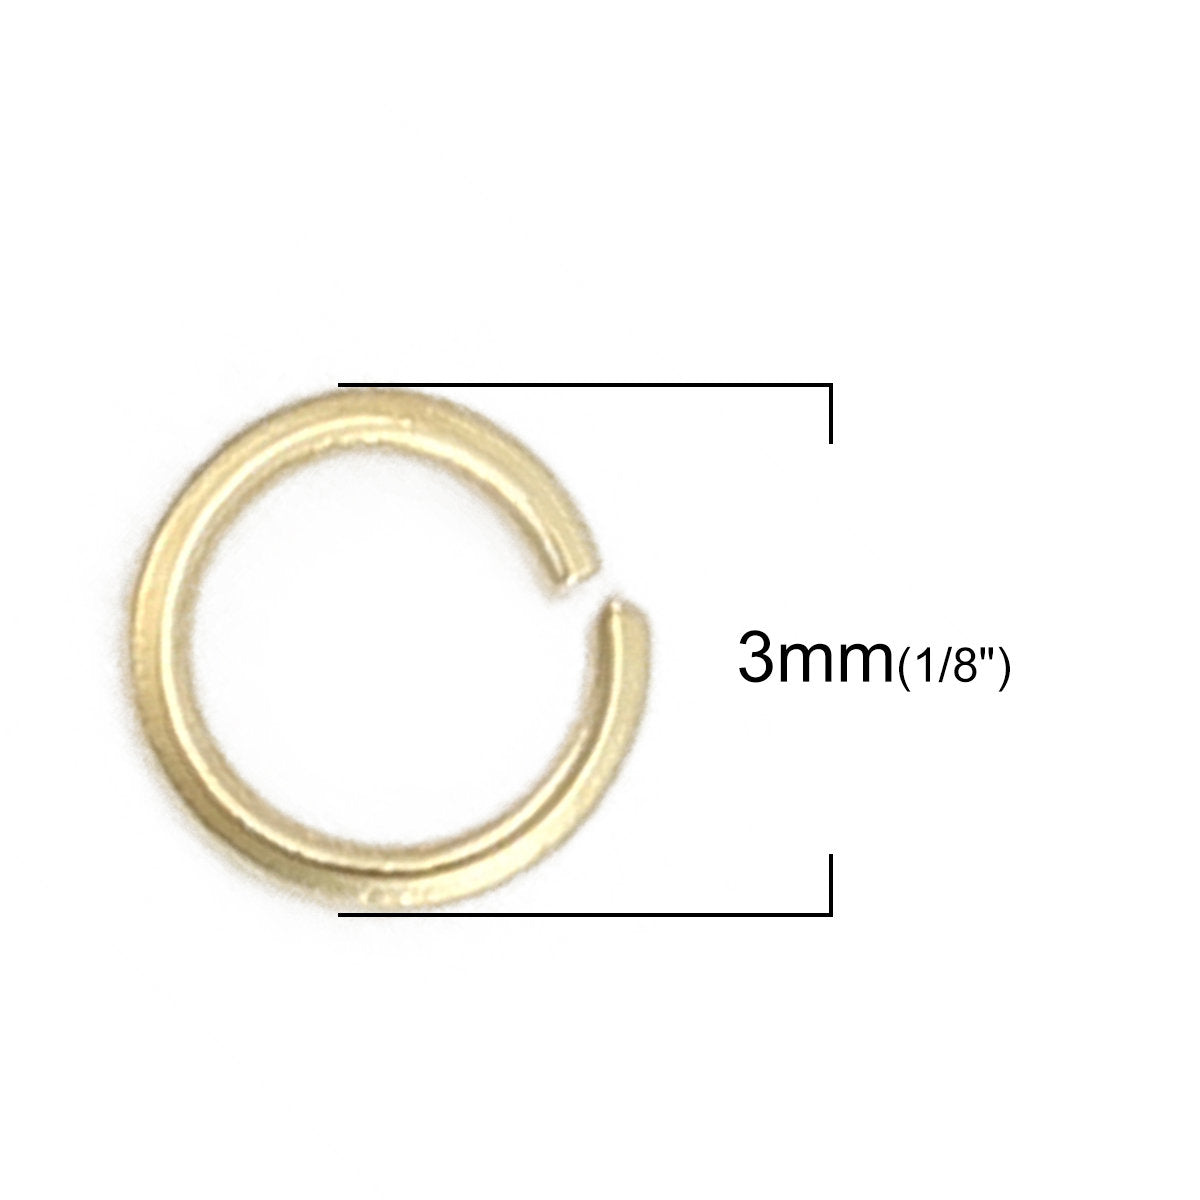 2000 Pcs Gold Jump Rings - 4mm Jump Rings for Jewelry Making, Open Jump Rings - O Rings for Jewelry Making,Jewelry Jump Rings for Keychains - Jump